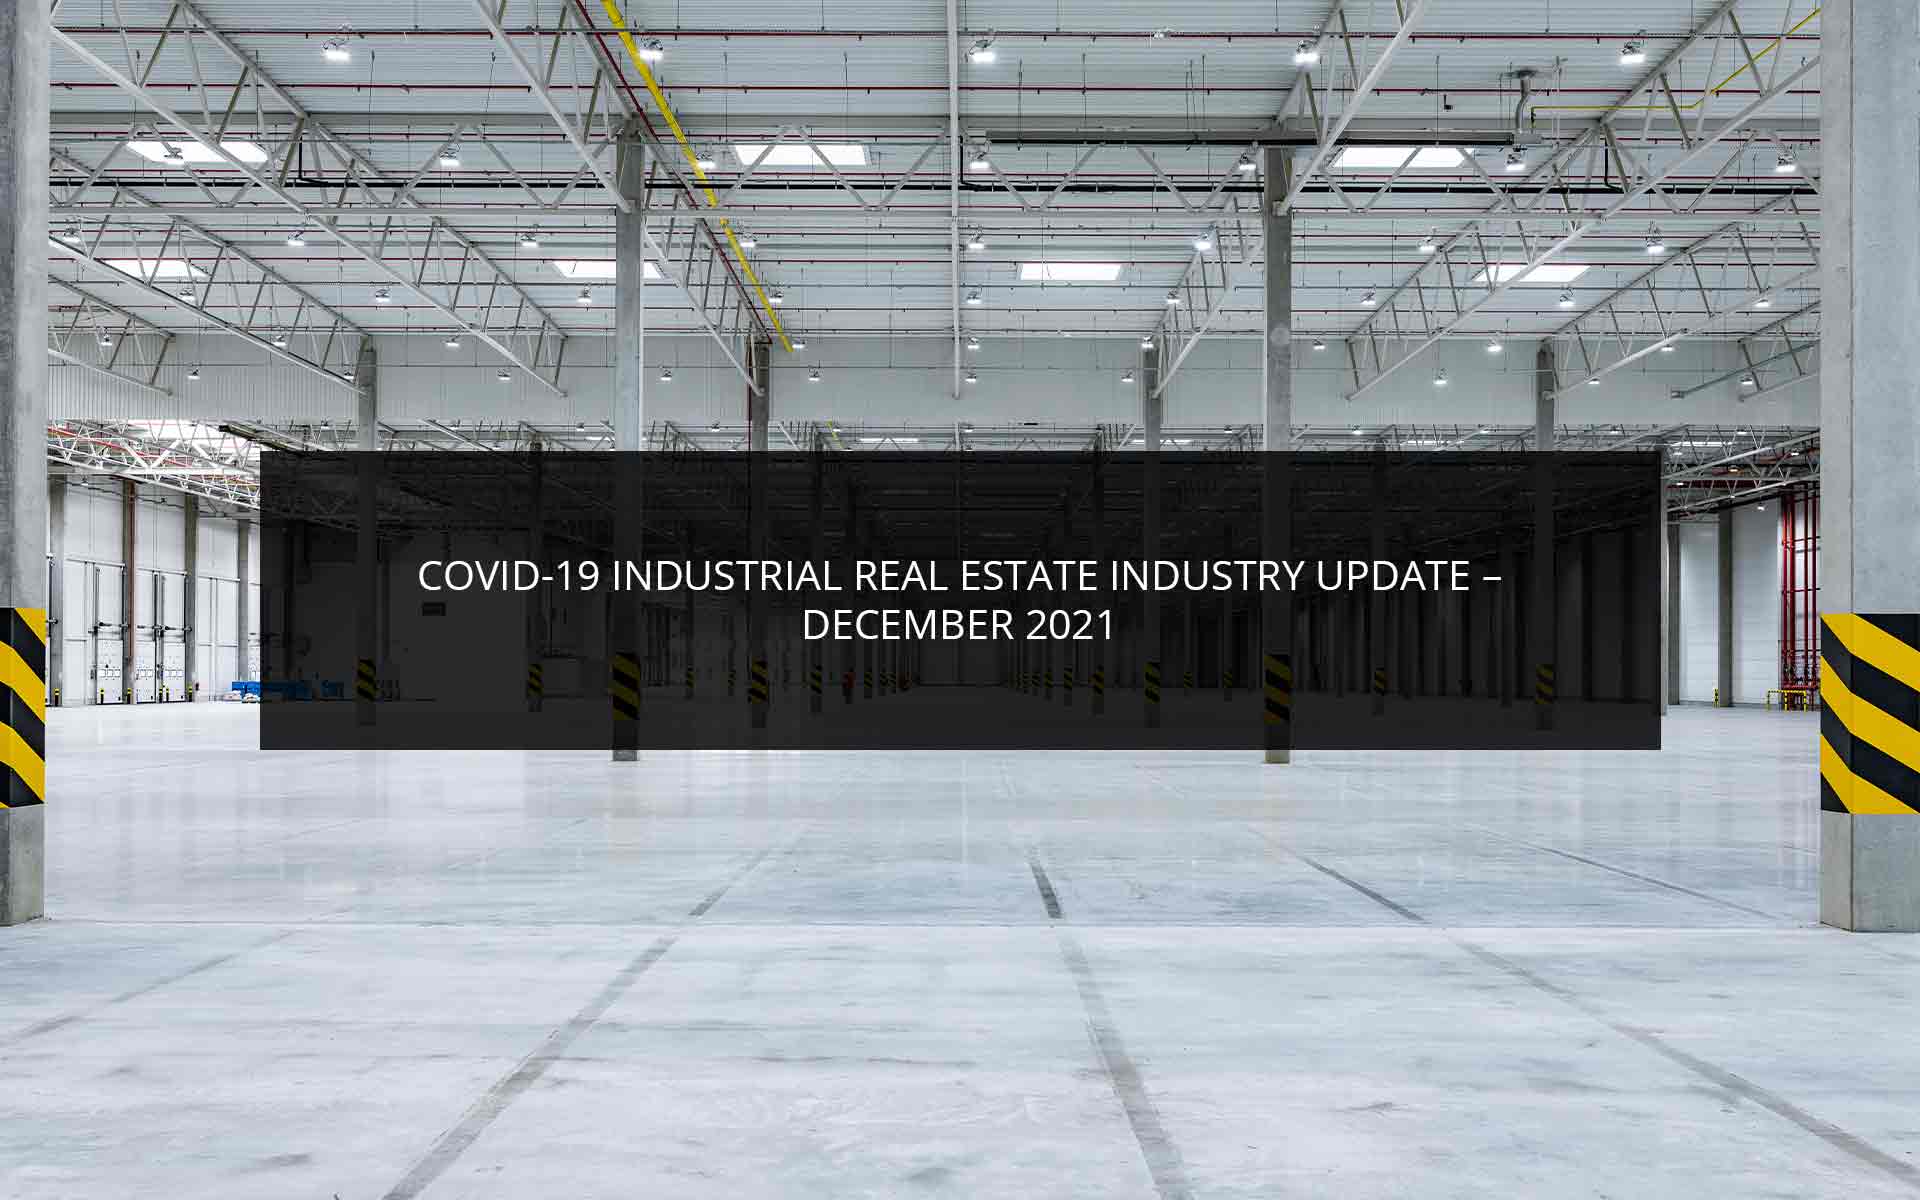 Covid-19 Industrial Real Estate Industry Update